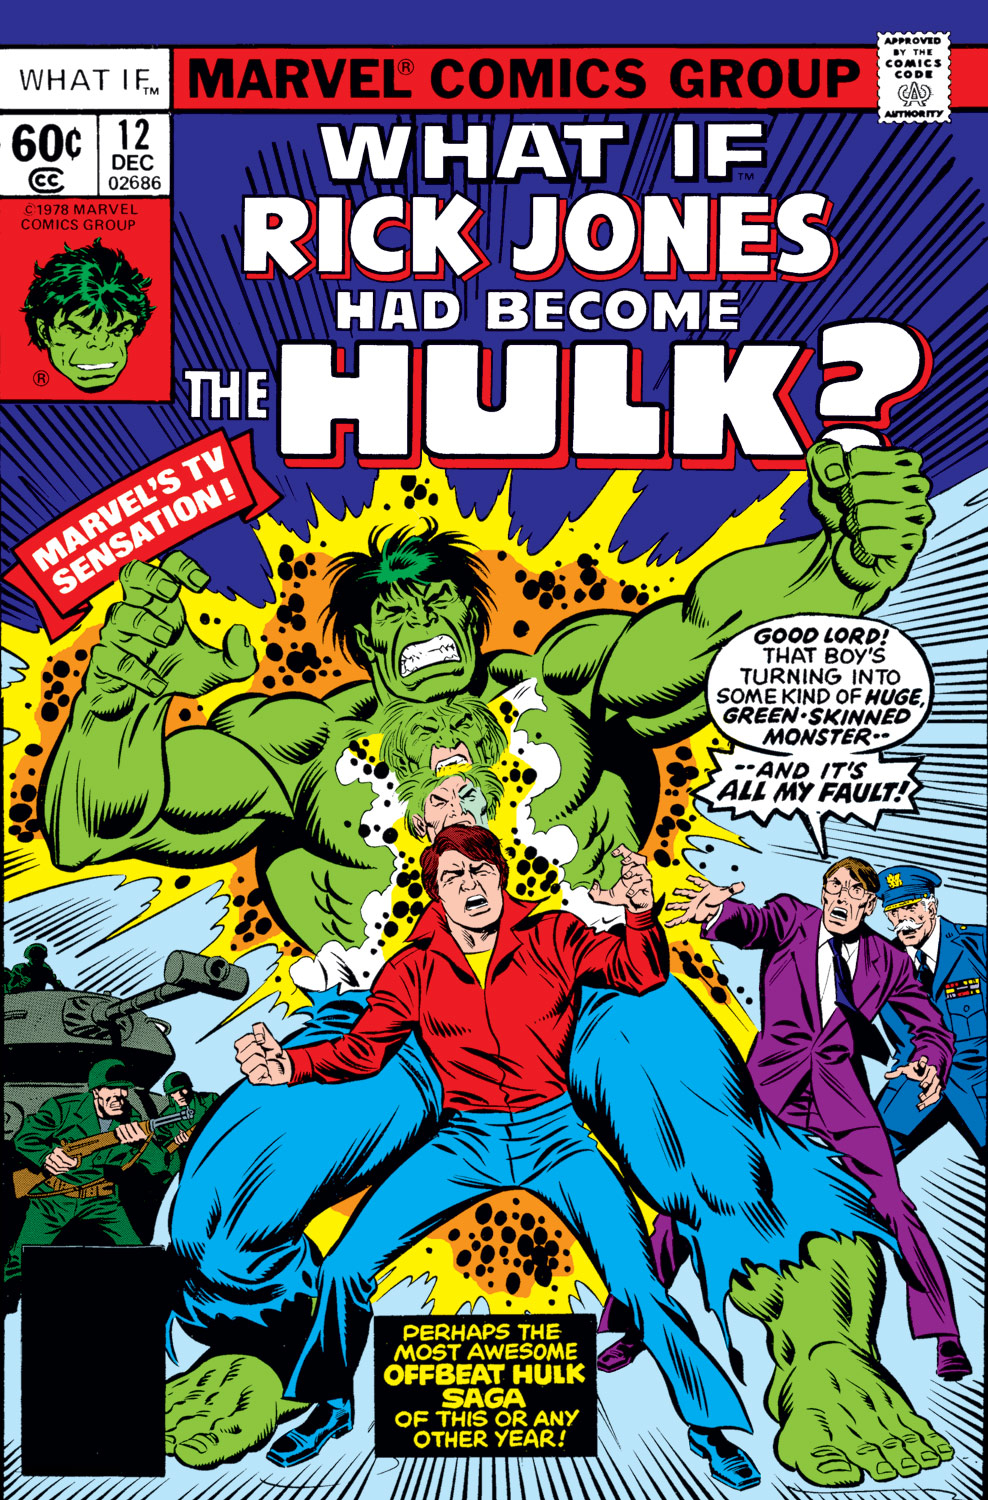 What If? (1977) issue 12 - Rick Jones had become the Hulk - Page 1